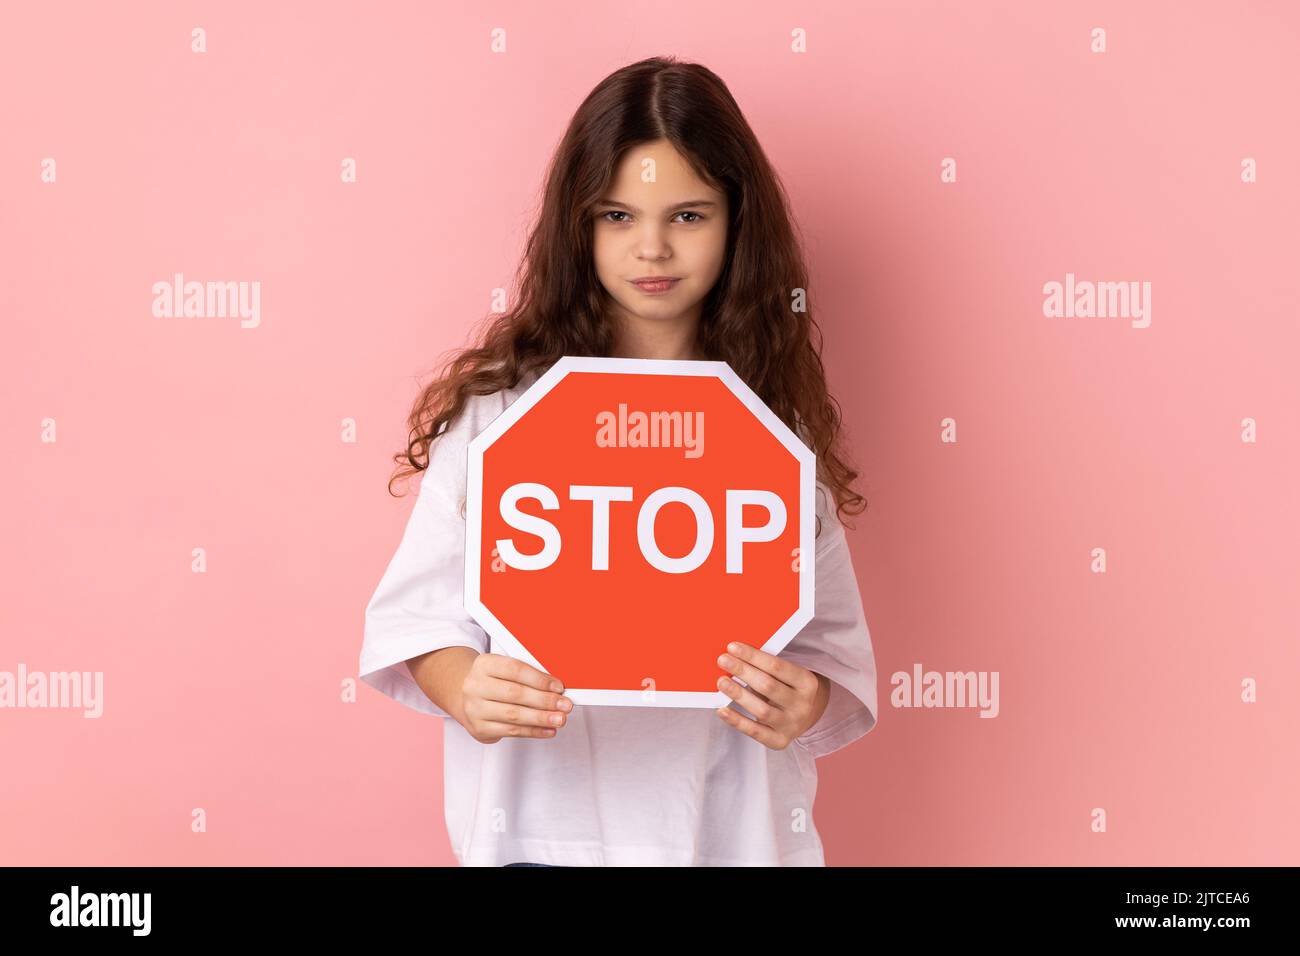 Portrait of strict bossy adorable little girl wearing white T-shirt holding red stop sign looking at camera with serious expression. Indoor studio shot isolated on pink background. Stock Photo